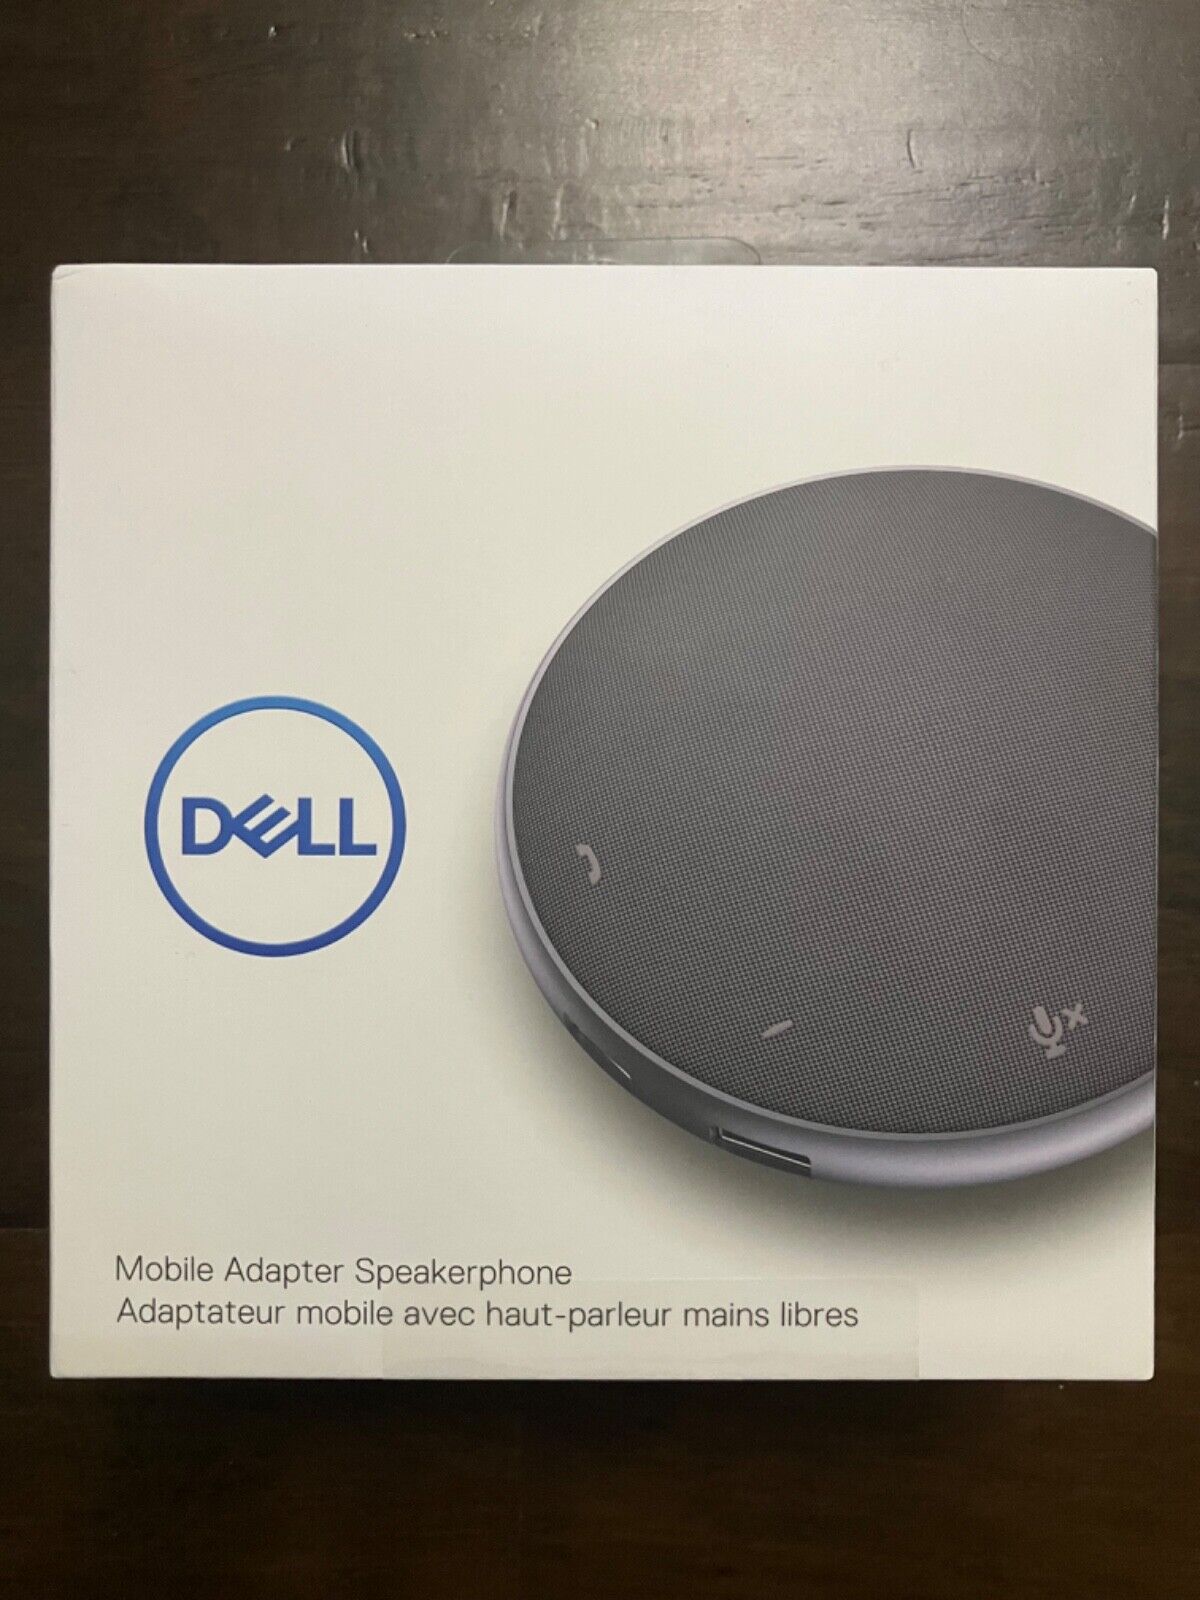 DELL Mobile Adapter Speakerphone - MH3021P (BRAND NEW & FACTORY SEALED)